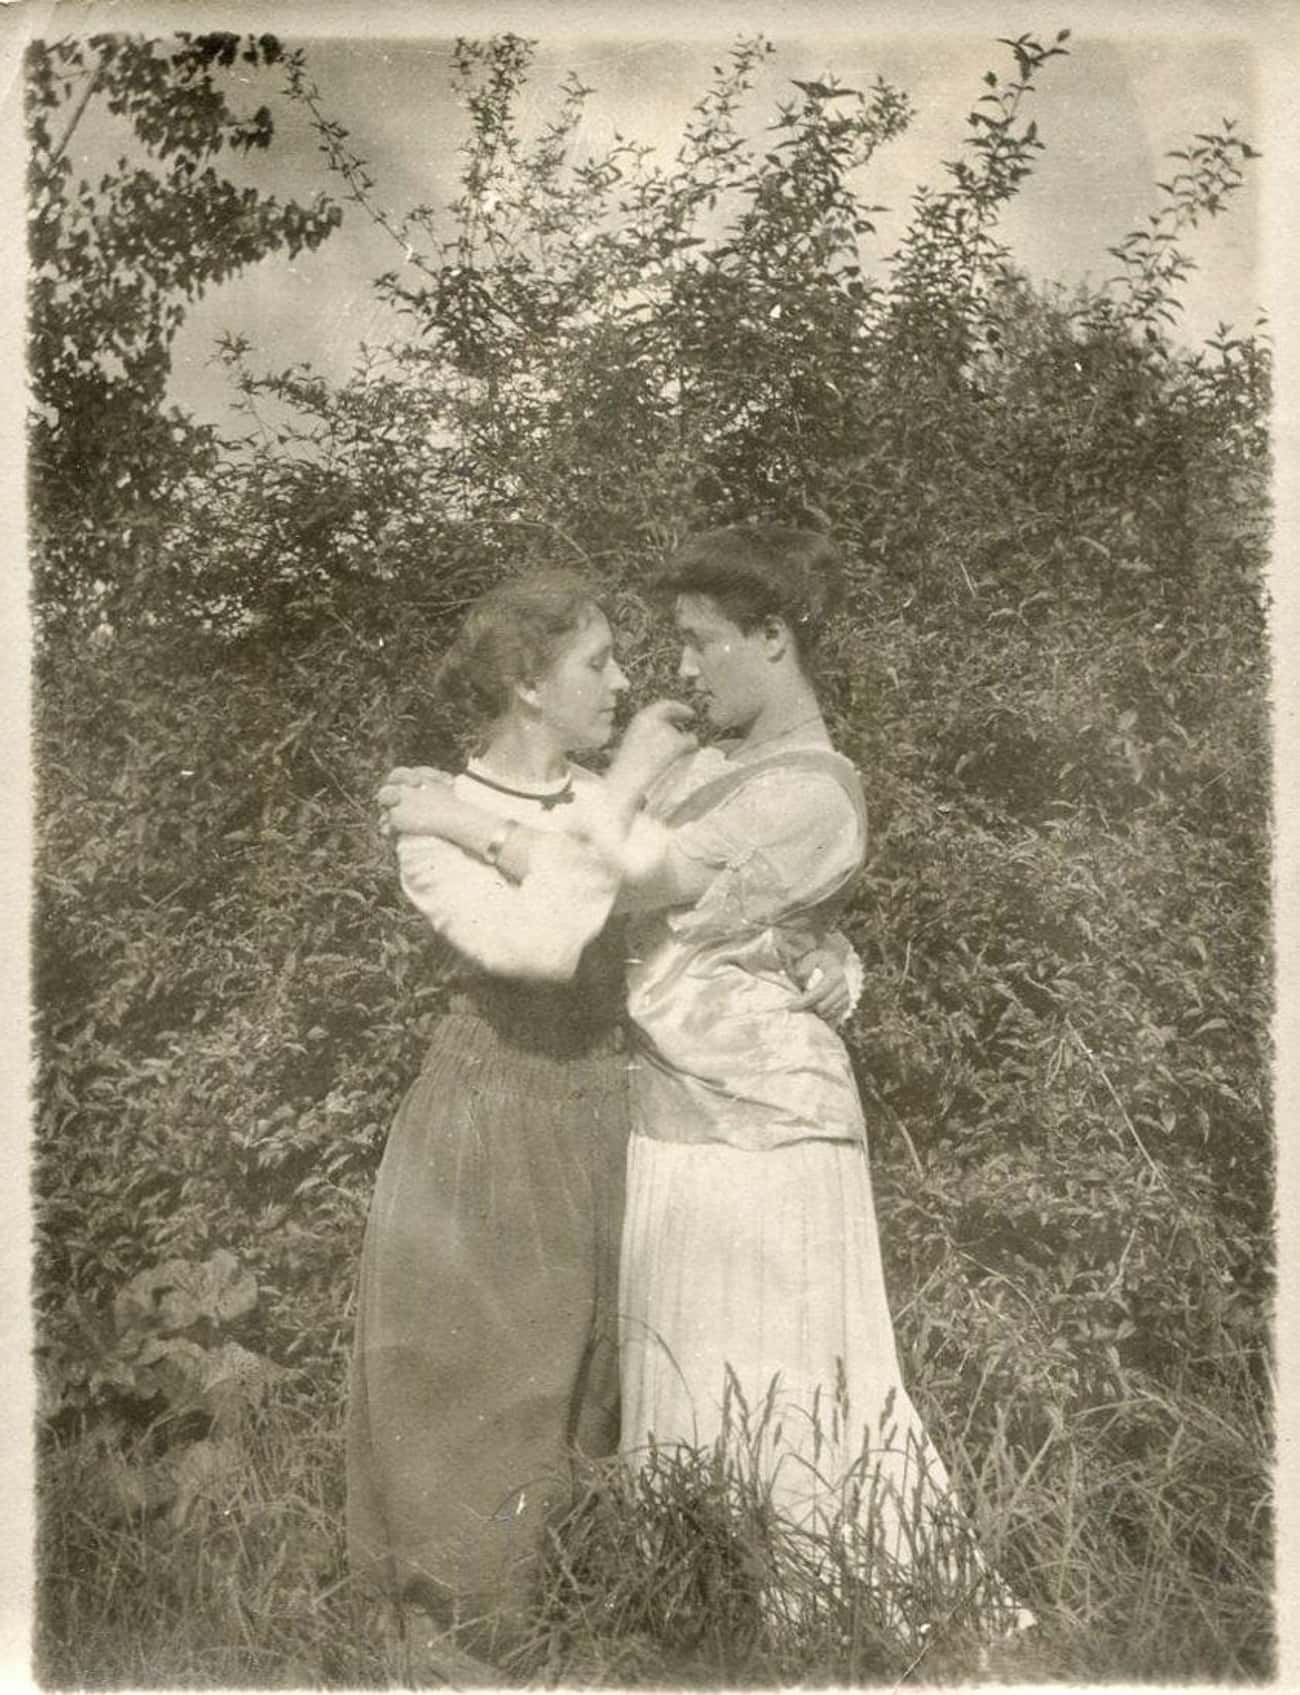 An Affectionate Couple In A Field, Unknown Year